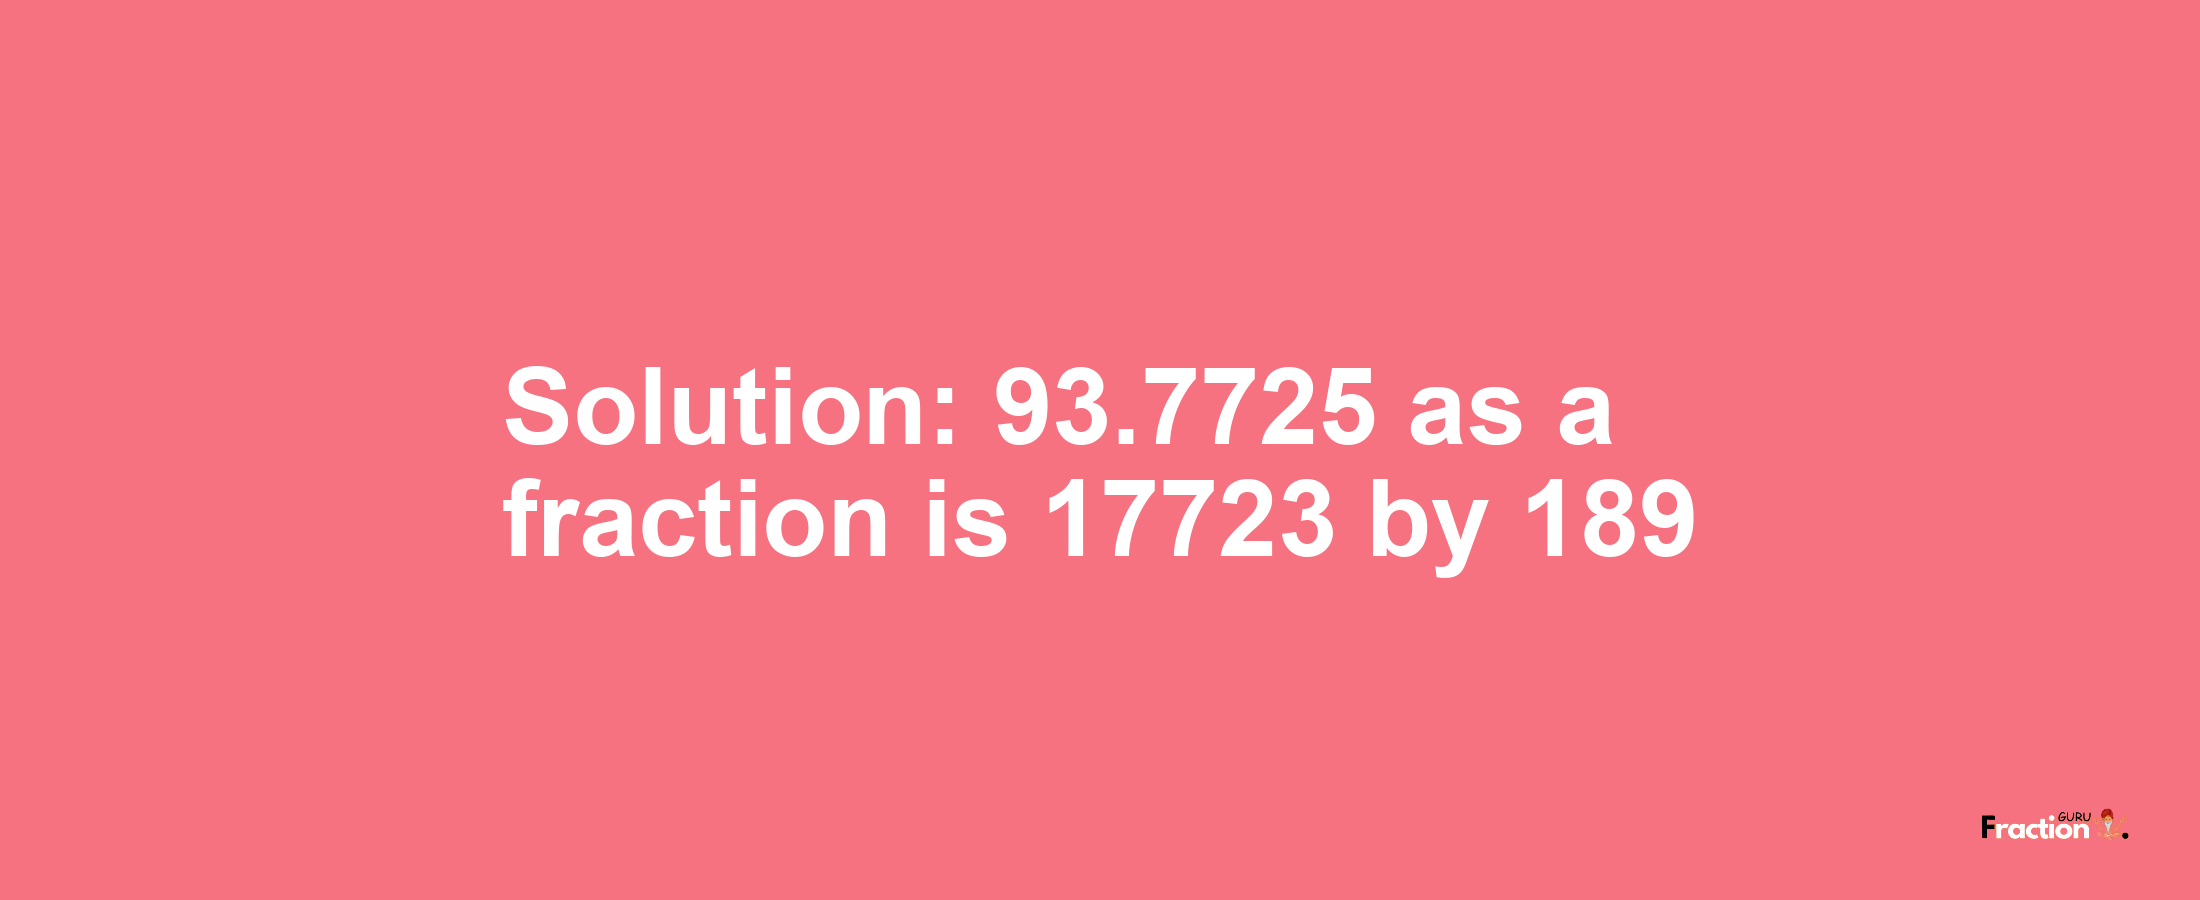 Solution:93.7725 as a fraction is 17723/189